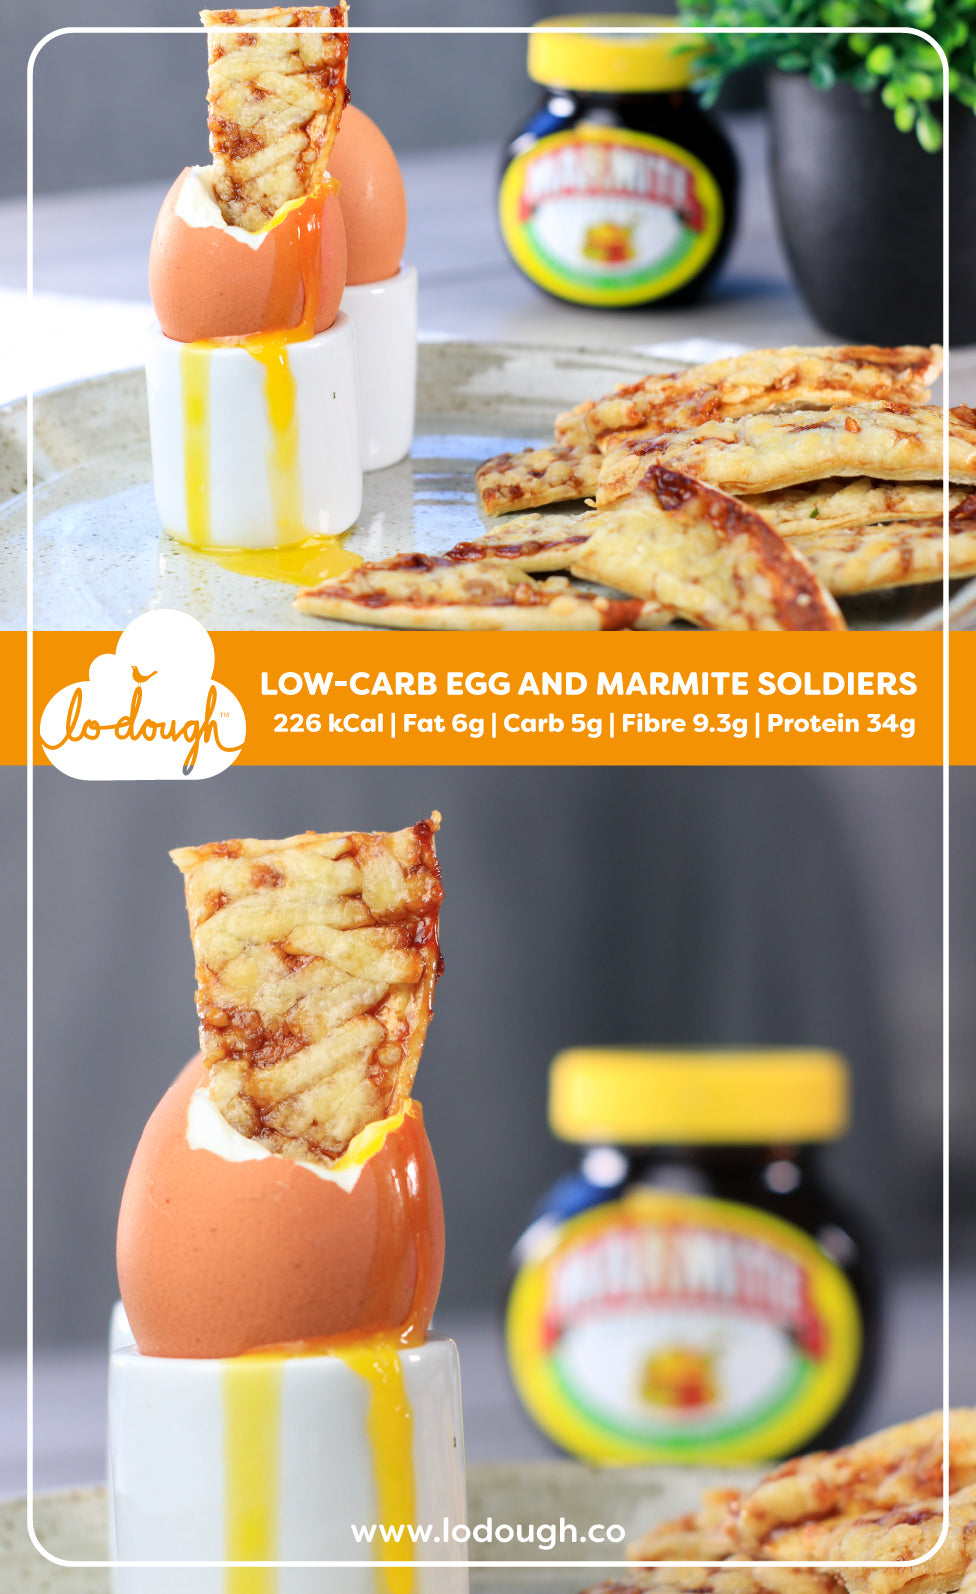 Low-Carb Egg And Marmite Soldiers